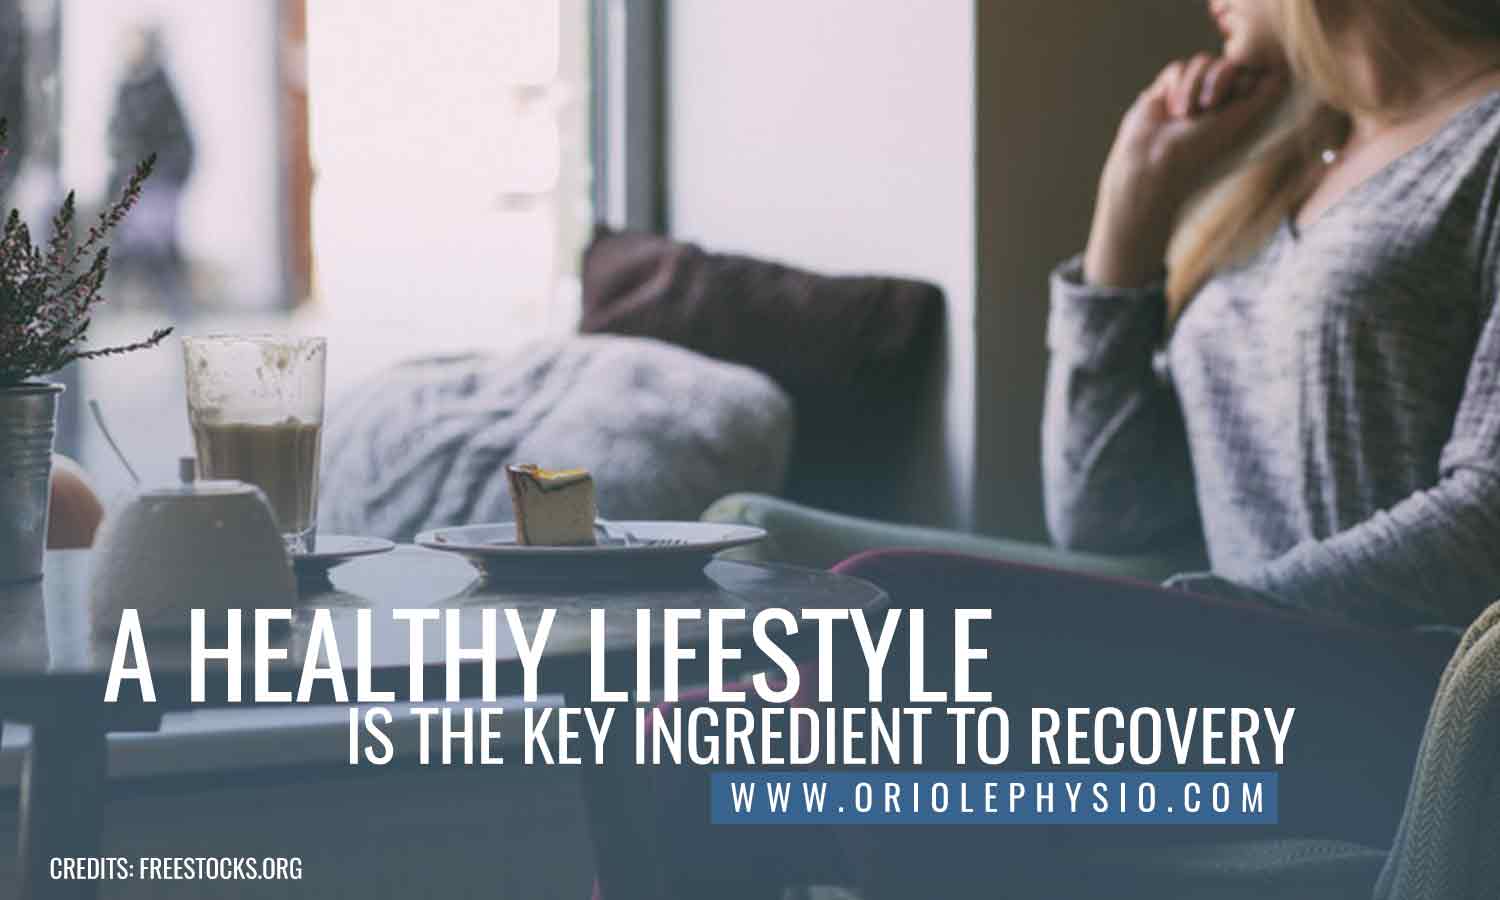 A healthy lifestyle is the key ingredient to recovery